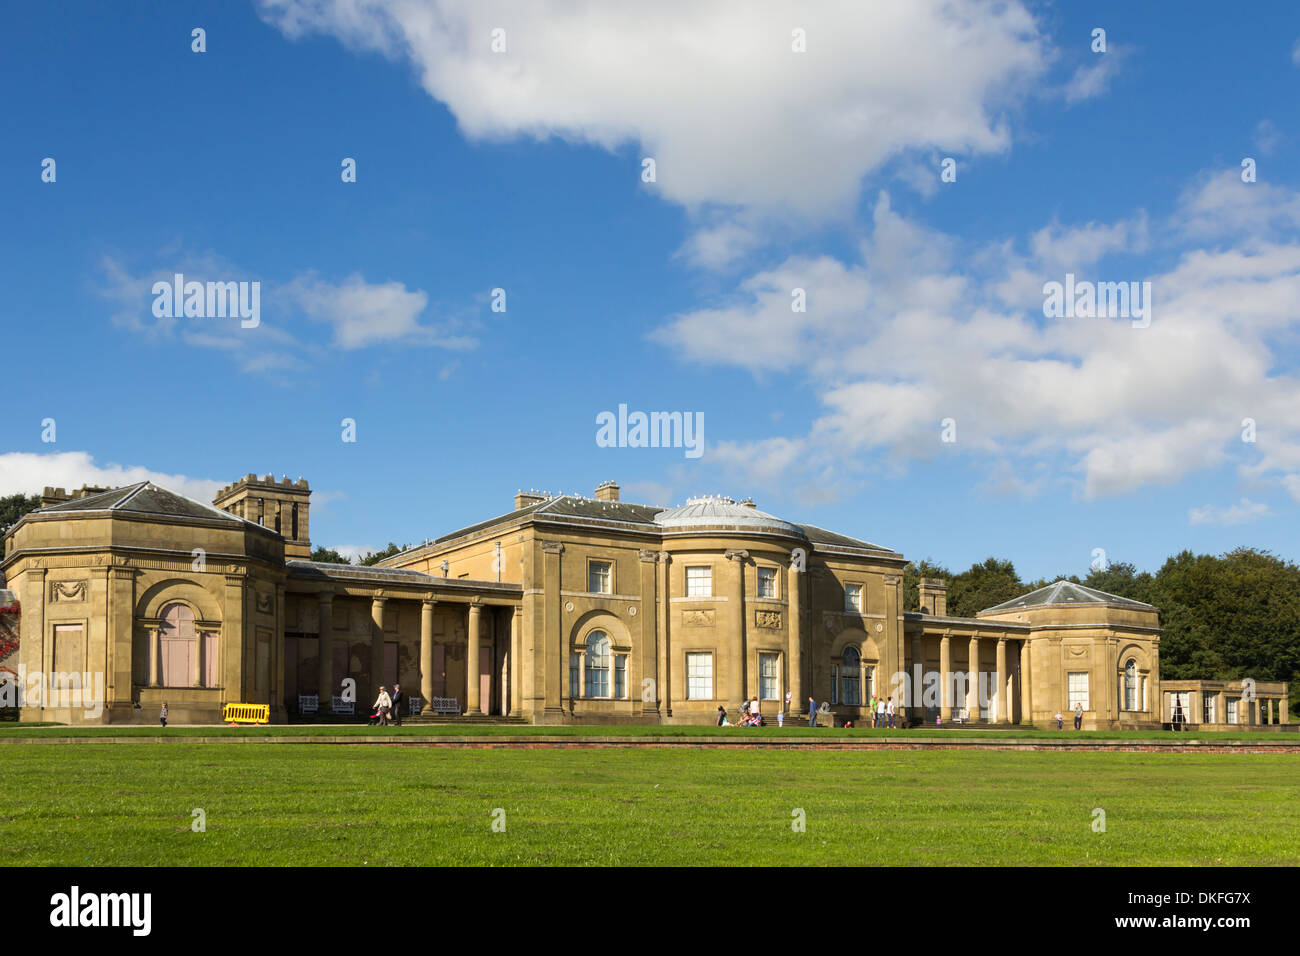 Heaton Hall in Heaton Park, Manchester is a grade 1 listed, late 18th century neoclassical, Palladian style large house. Stock Photo